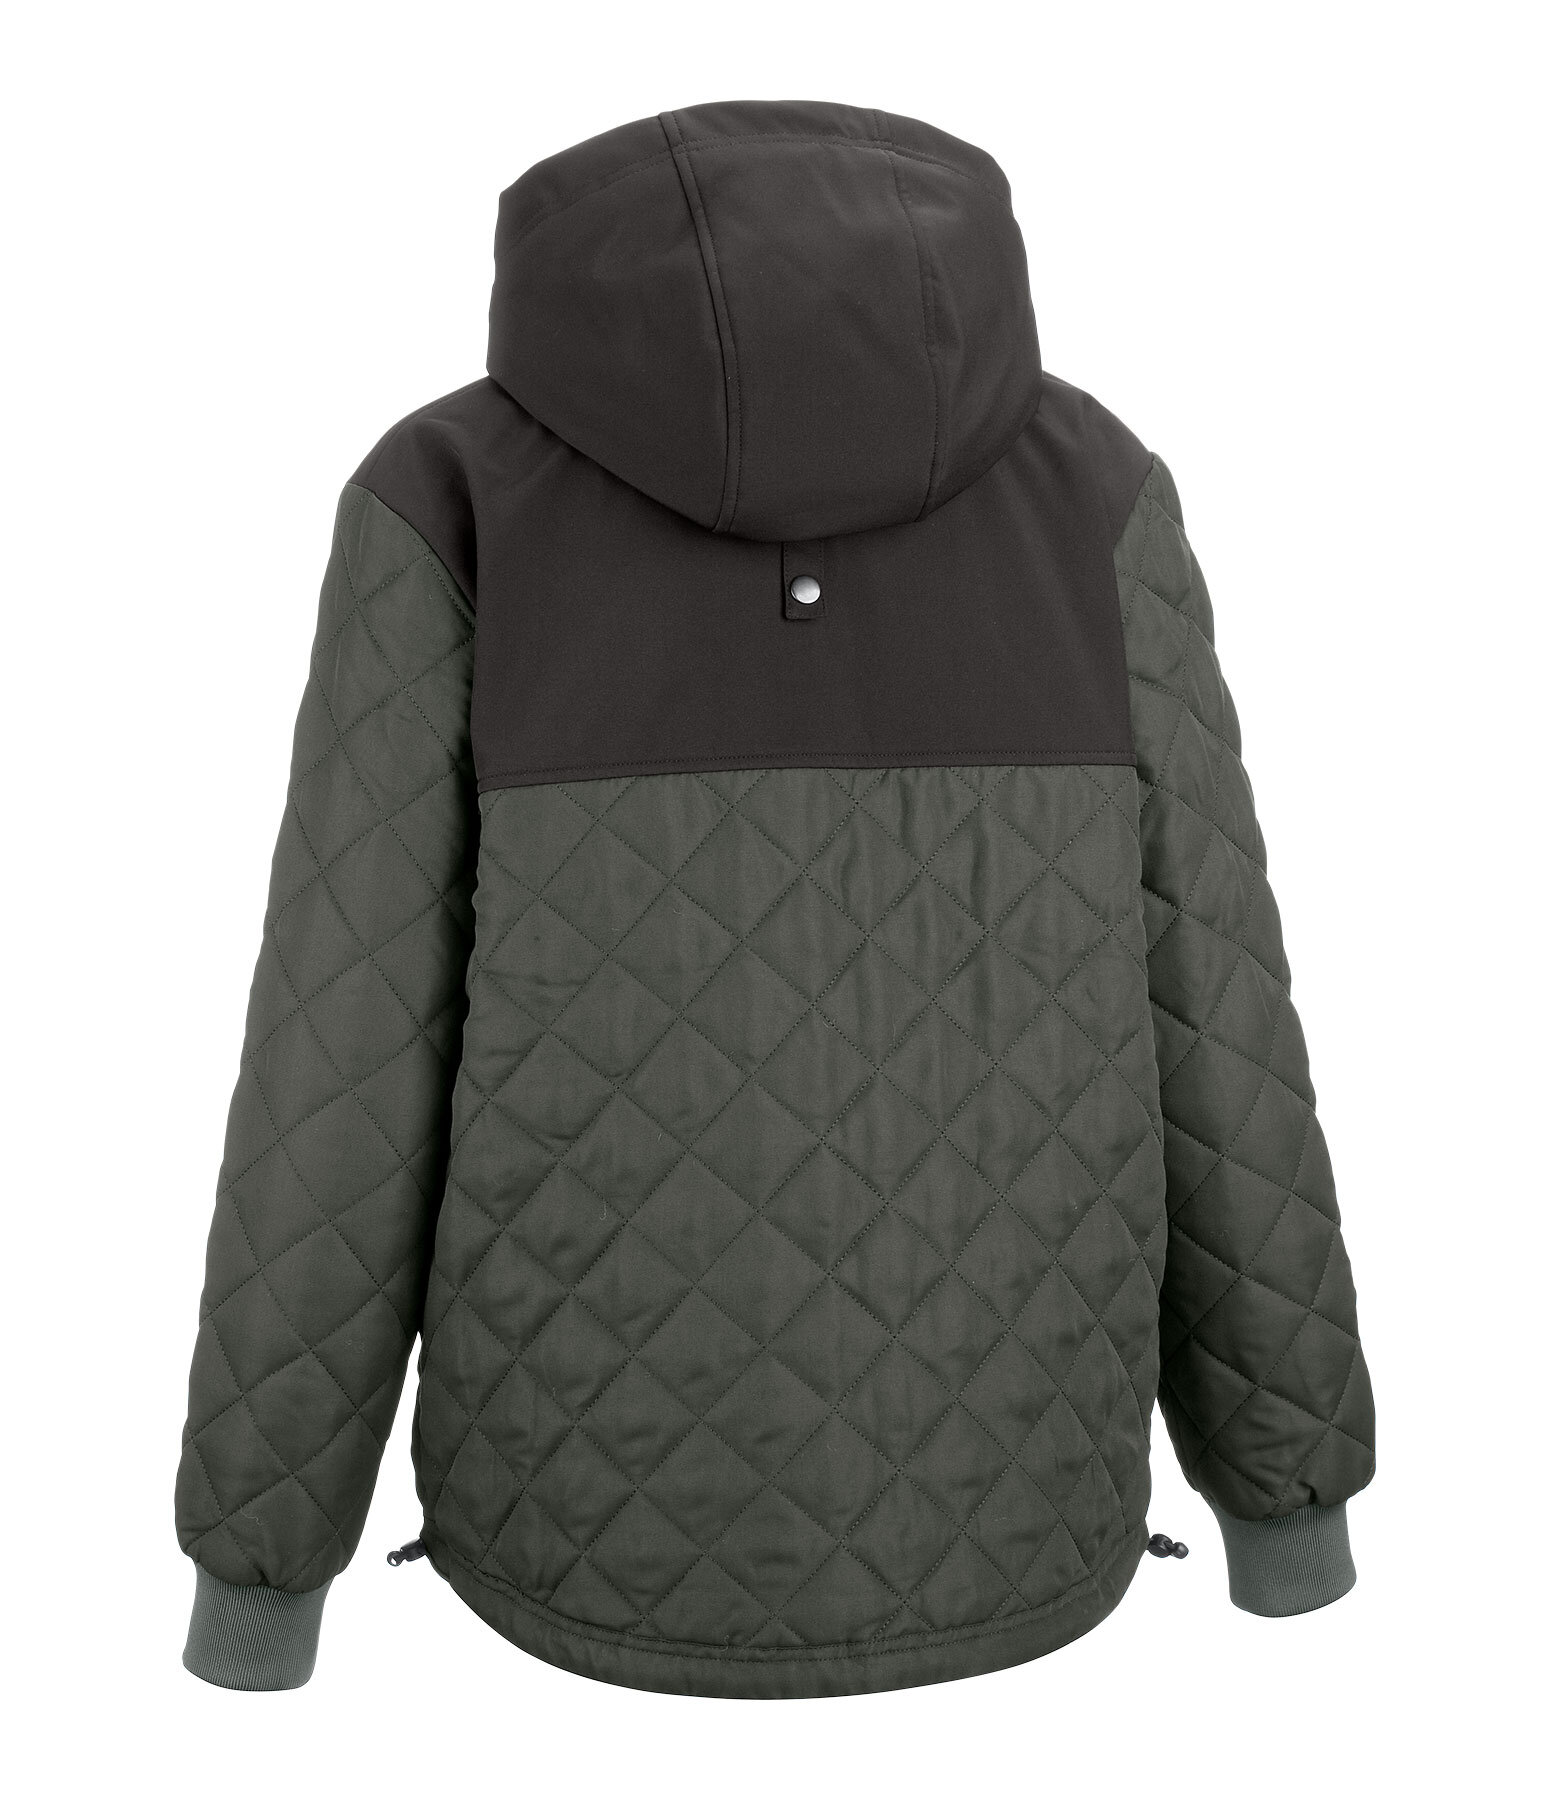 Pull-On Quilted Jacket Nova Scotia